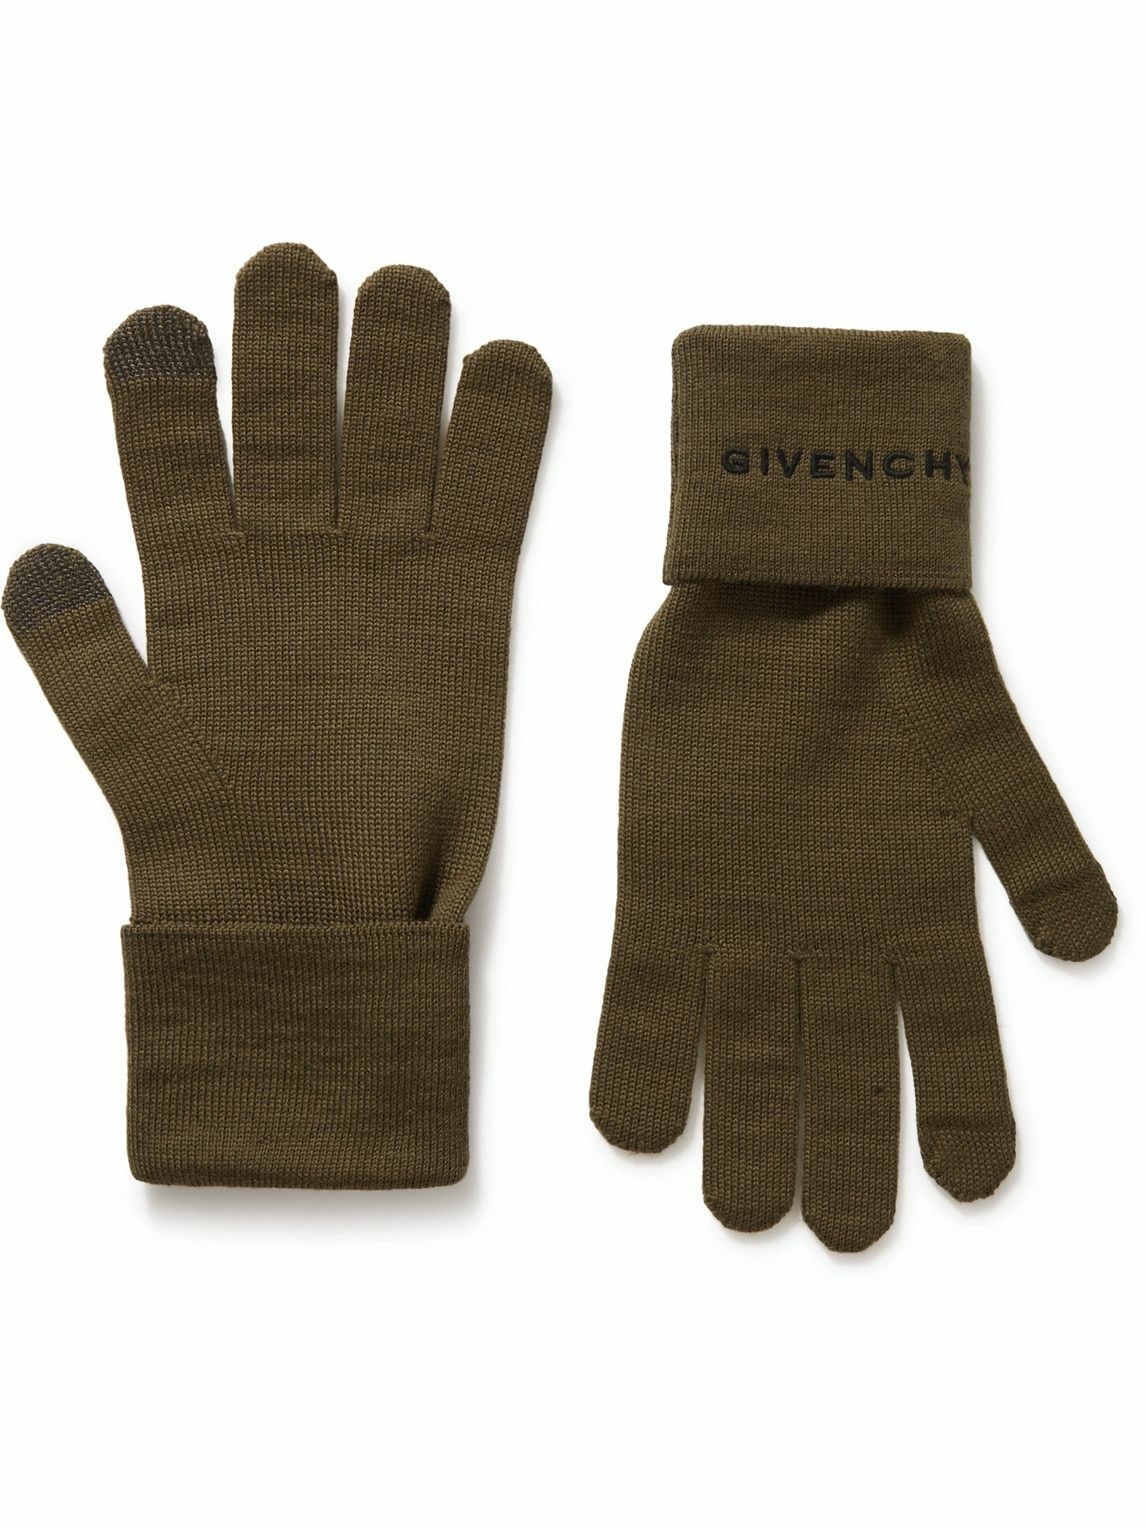 Givenchy - 4G Logo-Embroidered Wool Gloves Givenchy